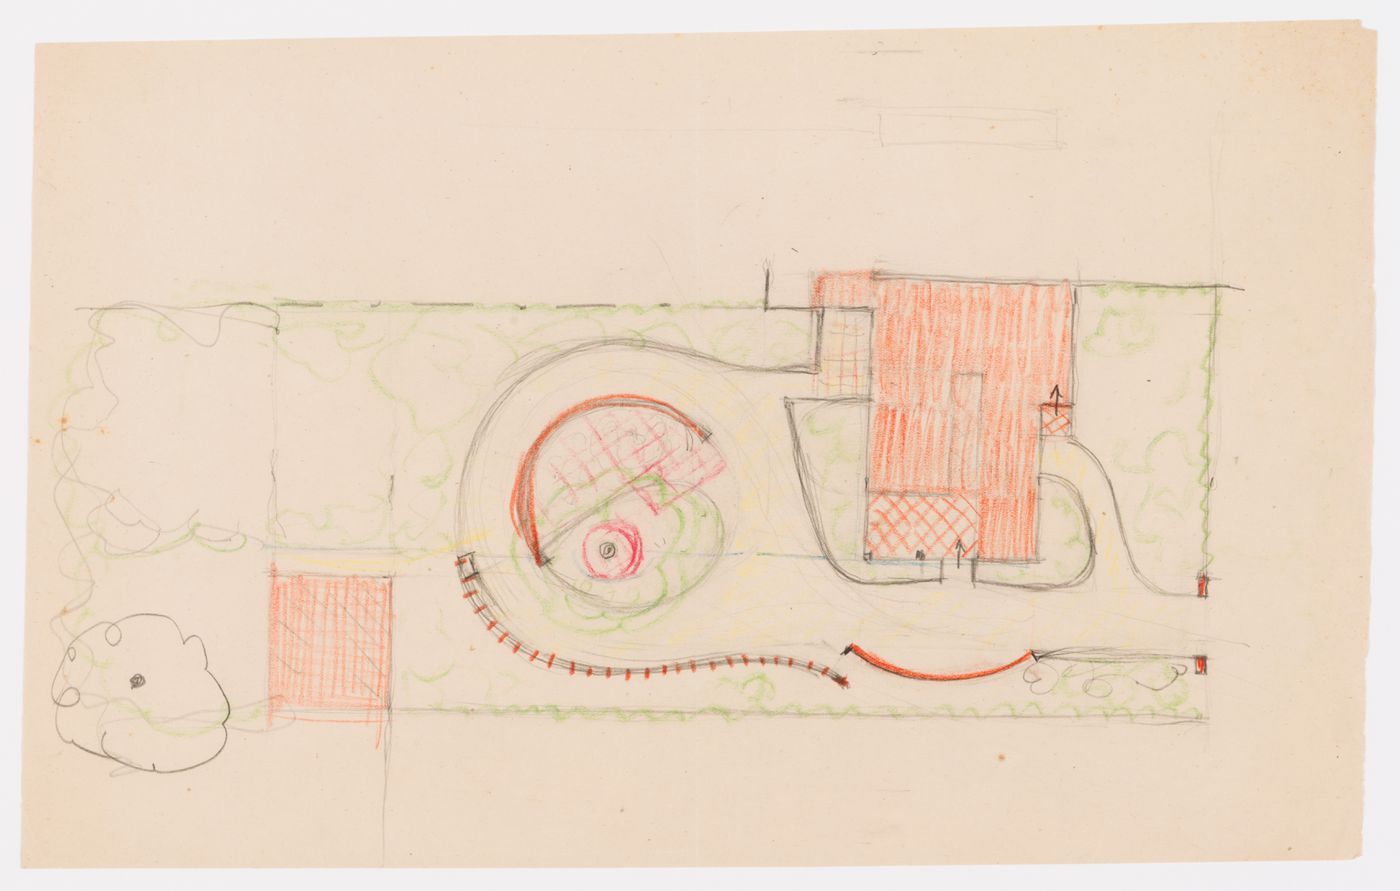 Sketch for a single-family house in Chandigarh, India